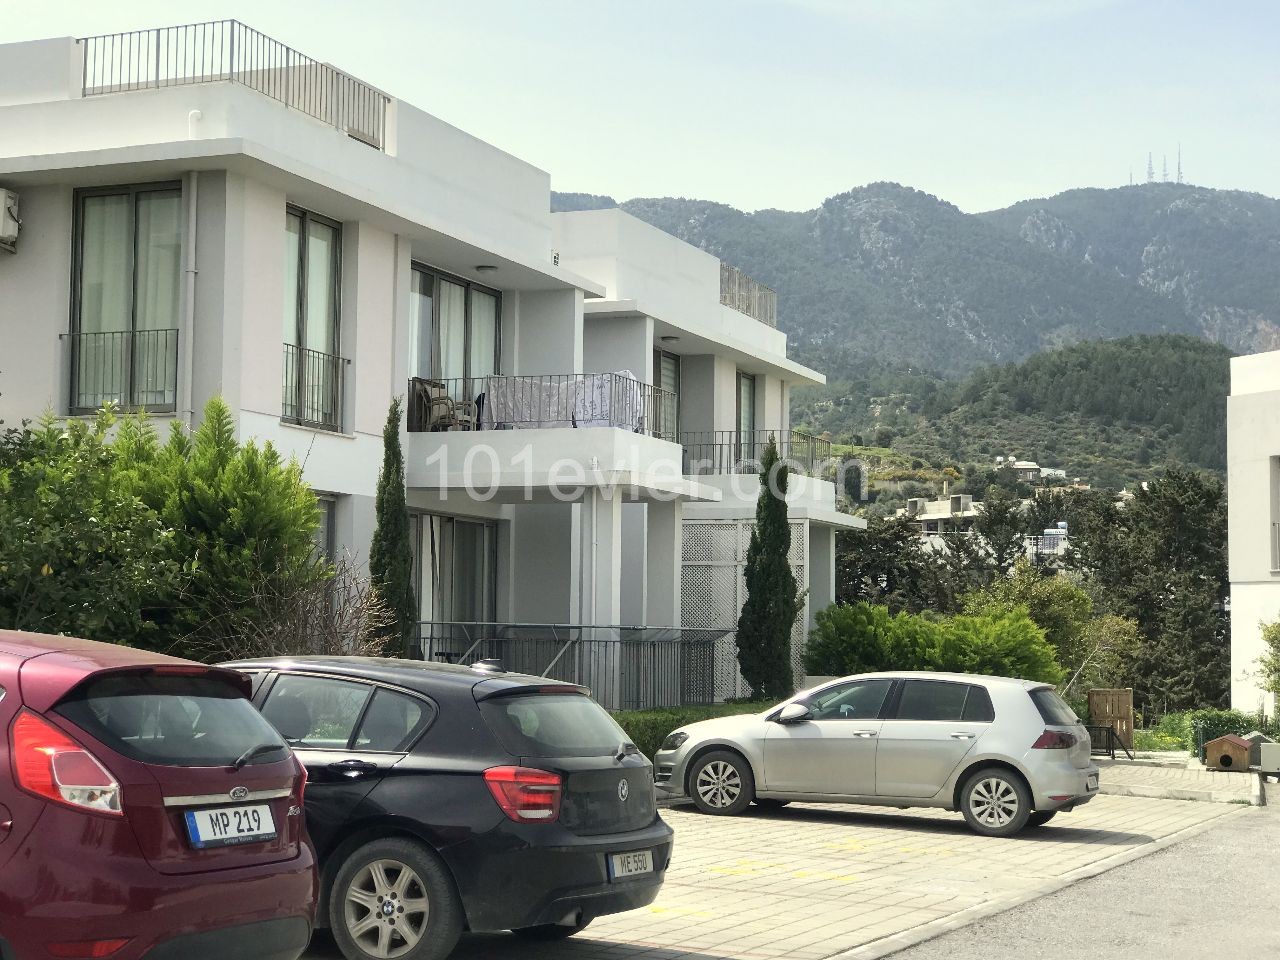 1st floor flat with terrace is for rent in a 7x24 secure site in Alsancak, Girne.05338403555 ** 